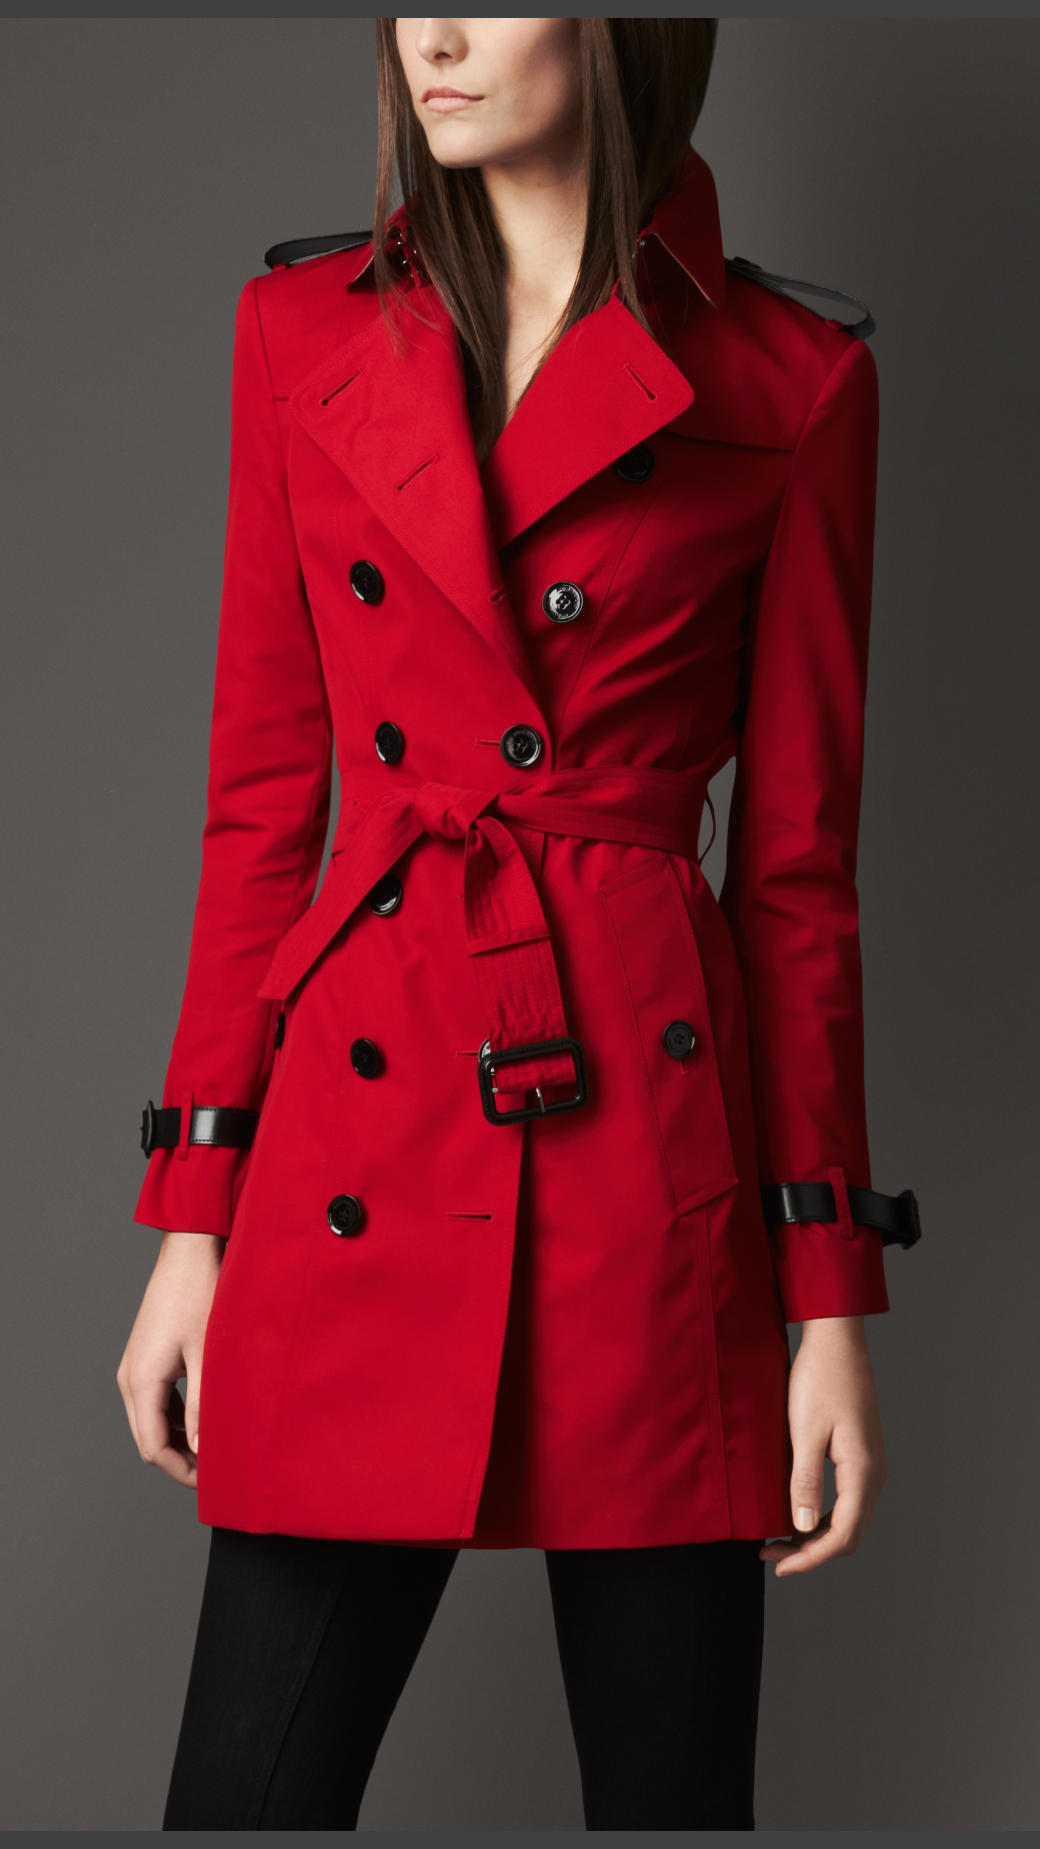 Burberry Midlength Trench Coat in Military Red (Red) - Lyst